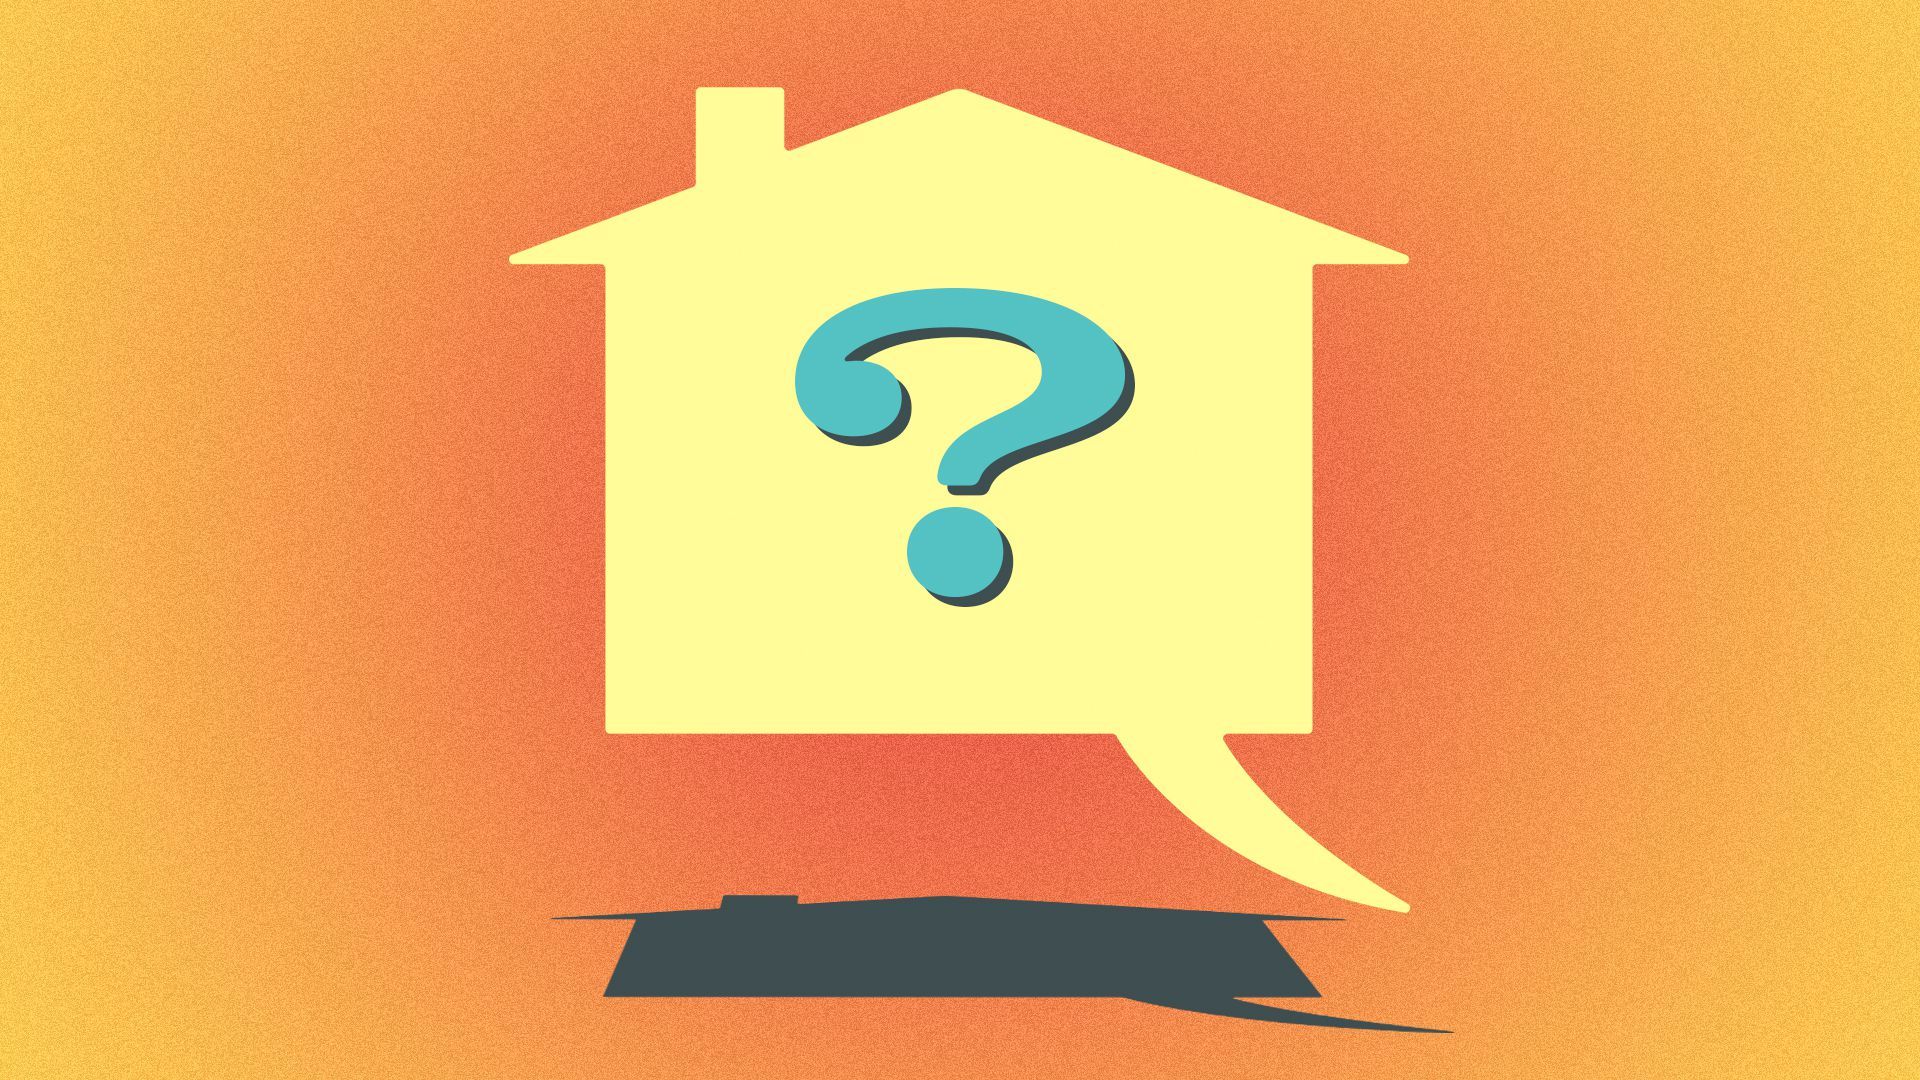 Illustration of a house-shaped word balloon with a question mark in it.